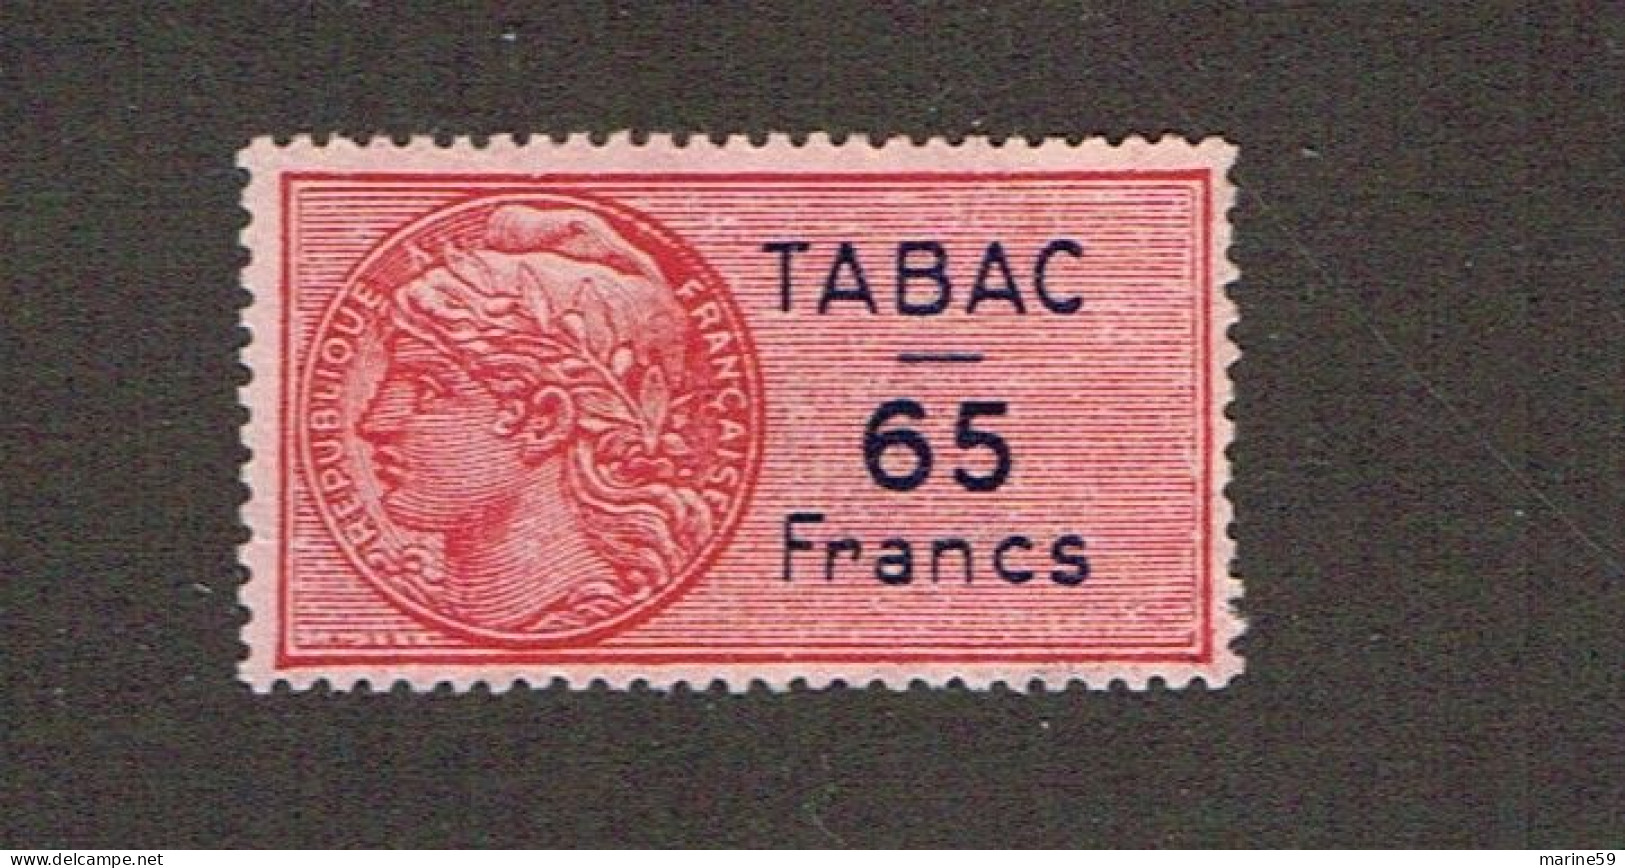 MA 131 - FRANCE - N° 1 - TABAC  - NSG - Timbres